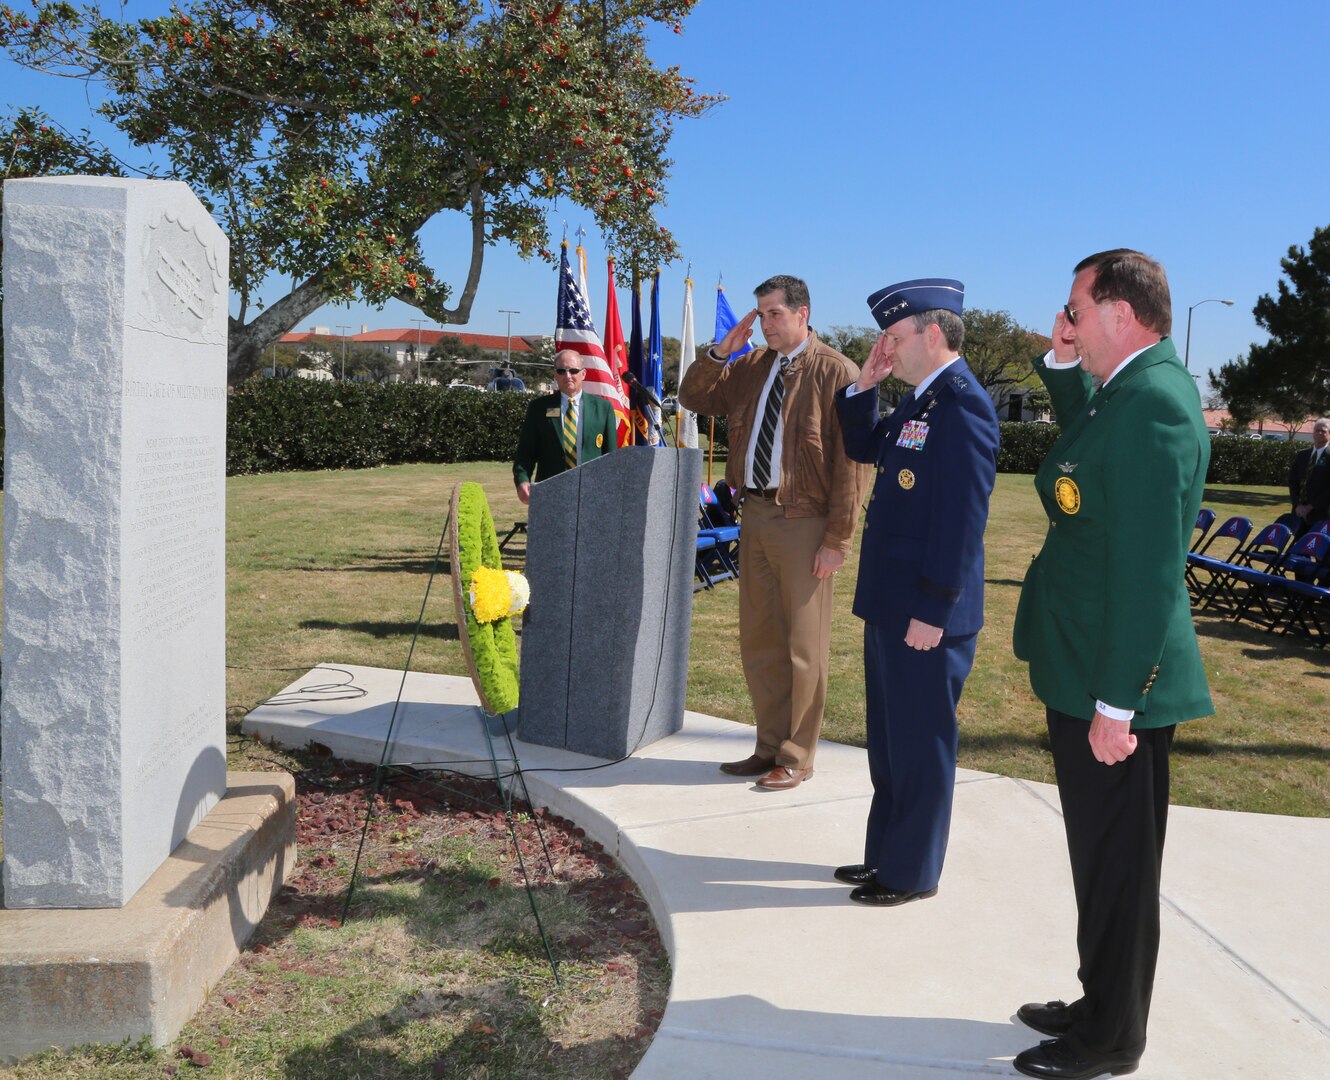 Lt. Gen. Douglas H. Owens (center), Air Education and Training command vice commander, retired Col. Dan Meyers (right), Order of Daedalians, Stinsons Flight captain, and retired Lt. Col. Dan Clark, Jack Dibrell Alamo Chapter; place the wreath during a ceremony commemorating the first military flight.  The ceremony was held at Joint Base San Antonio-Fort Sam Houston parade grounds March 1.  Flown by Lt. Benjamin Foulois March 2, 1910, the flight took place over the parade grounds at JBSA-Fort Sam Houston. Lieutenant Foulois' orders were to "teach himself to fly" in the only military aeroplane in existence at that time. His first flight lasted seven and one-half minutes and he flew the Wright "B" Flyer to 100 feet before landing. (U.S. Air Force photo by Rich McFadden)